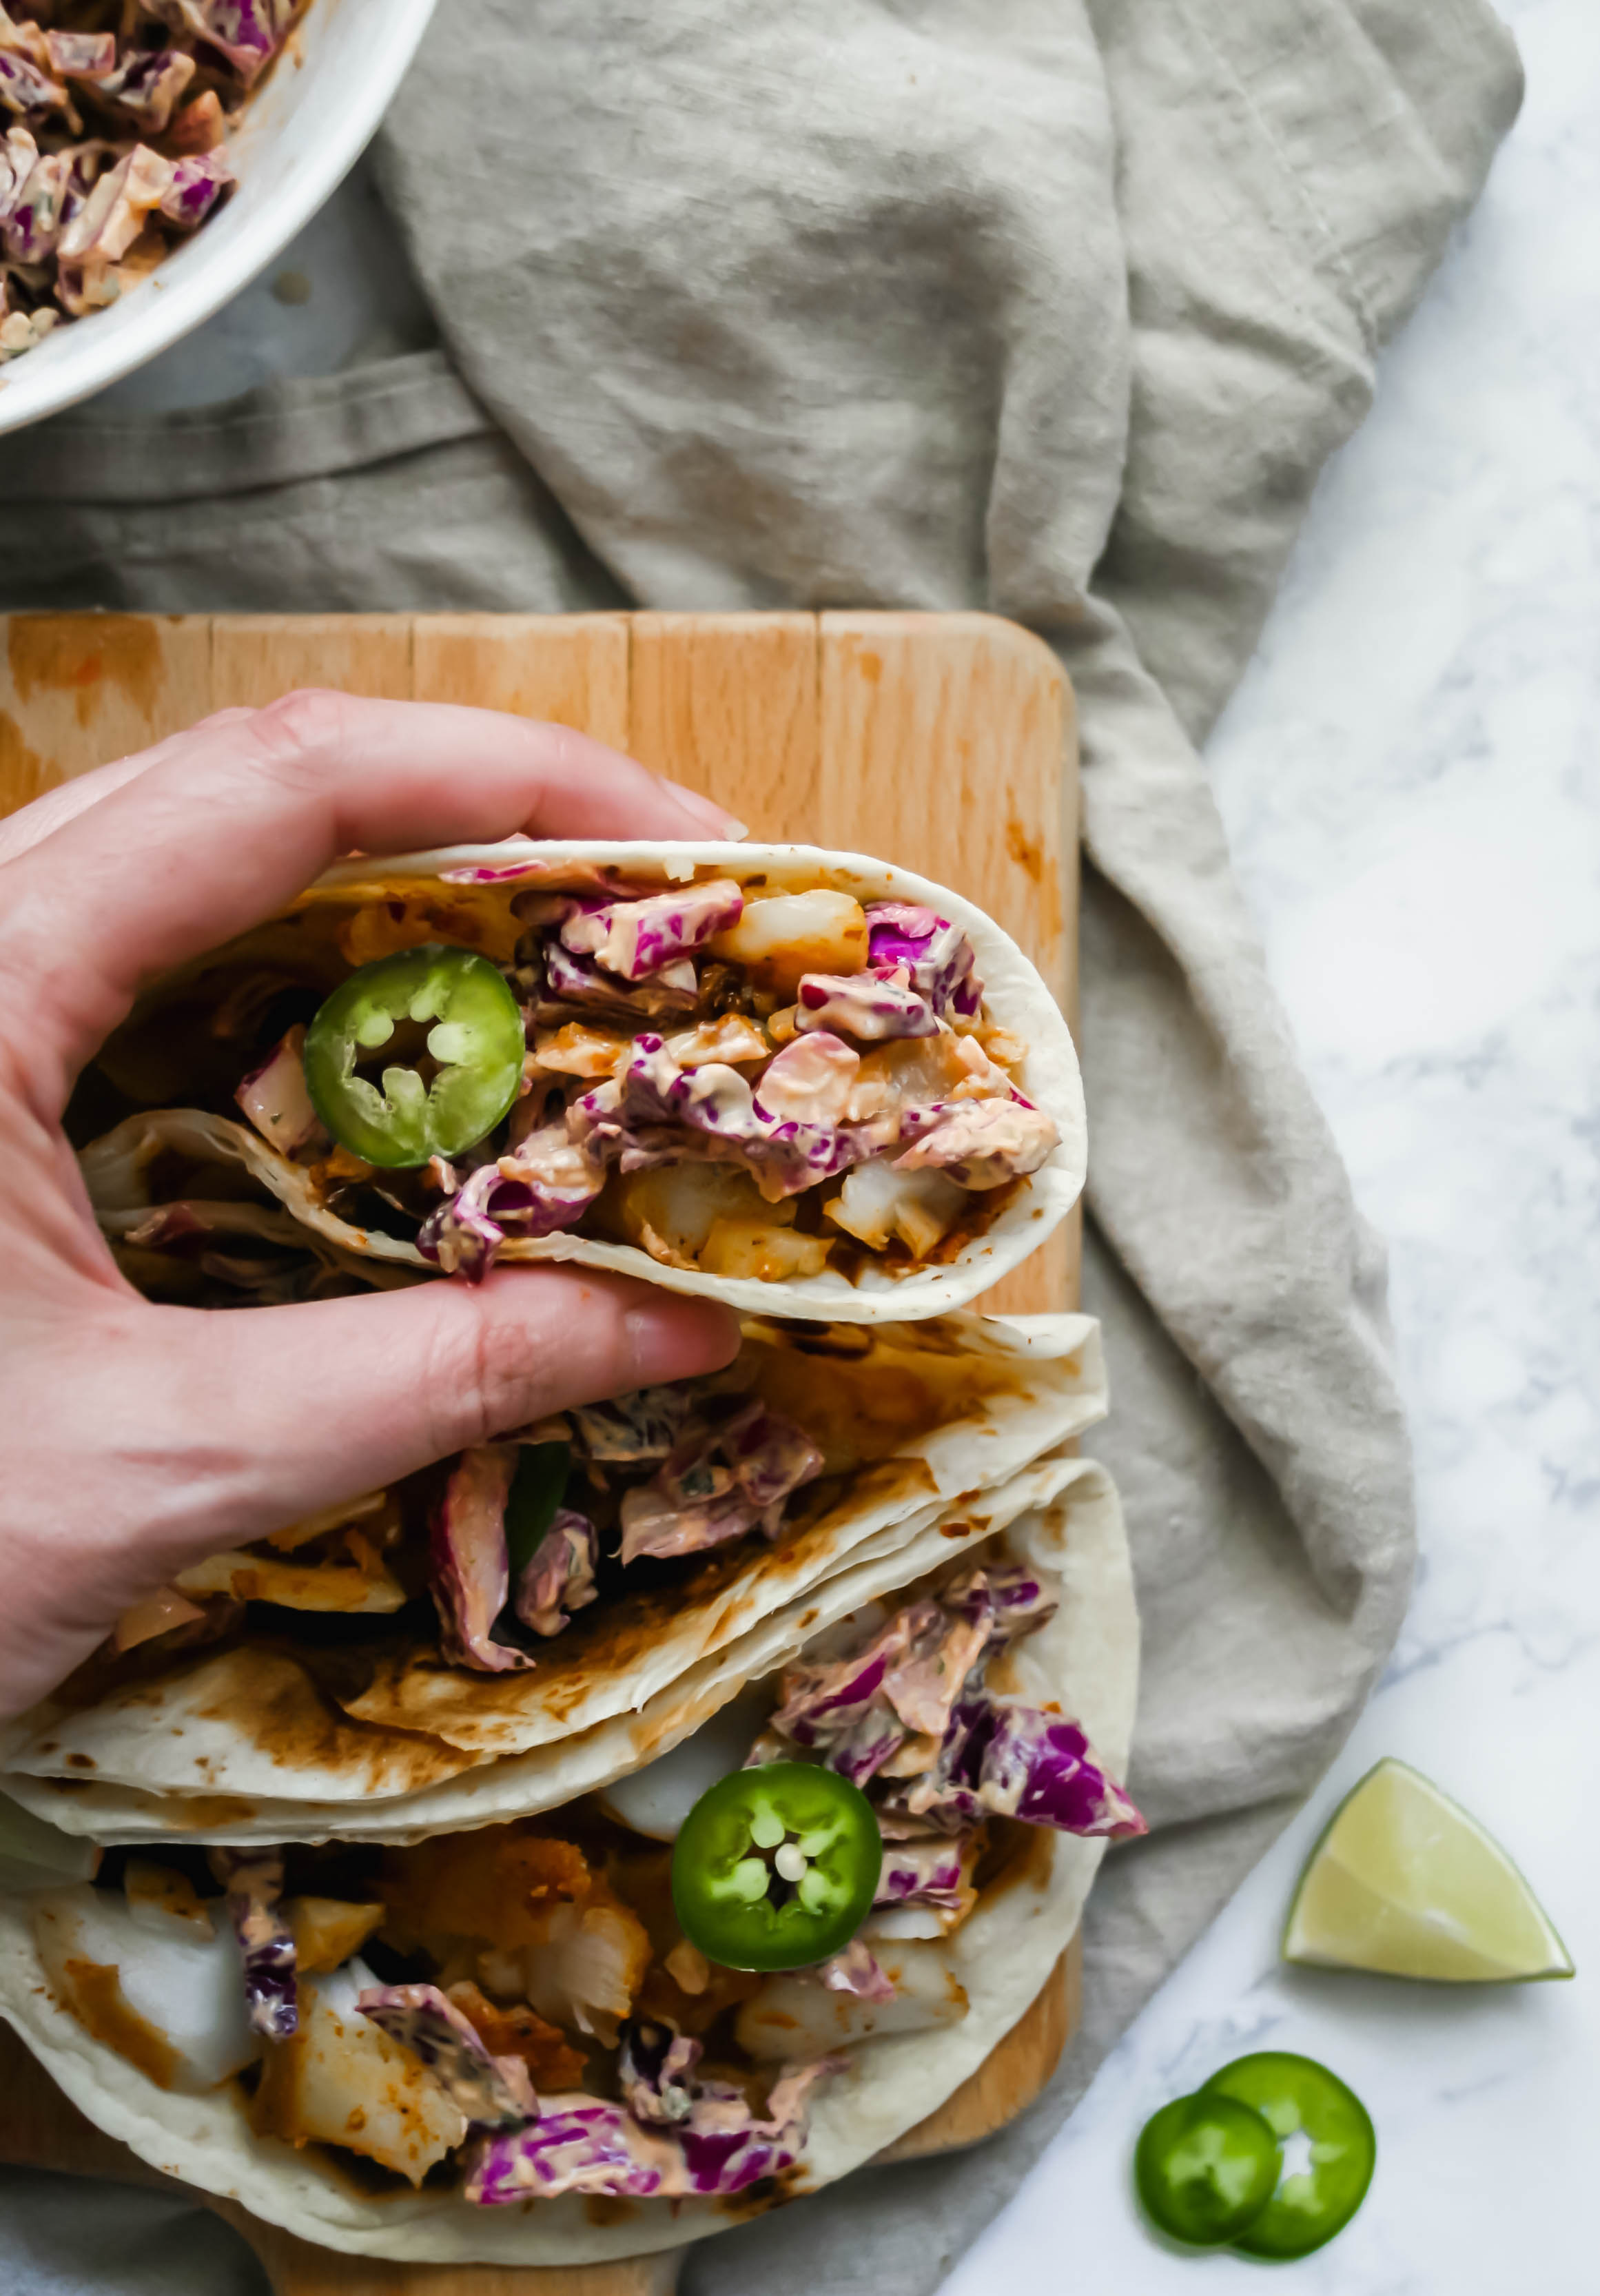 Fish Tacos With Crunchy Red Cabbage Slaw A Flavor Journal,Thermofoil Cabinets Peeling